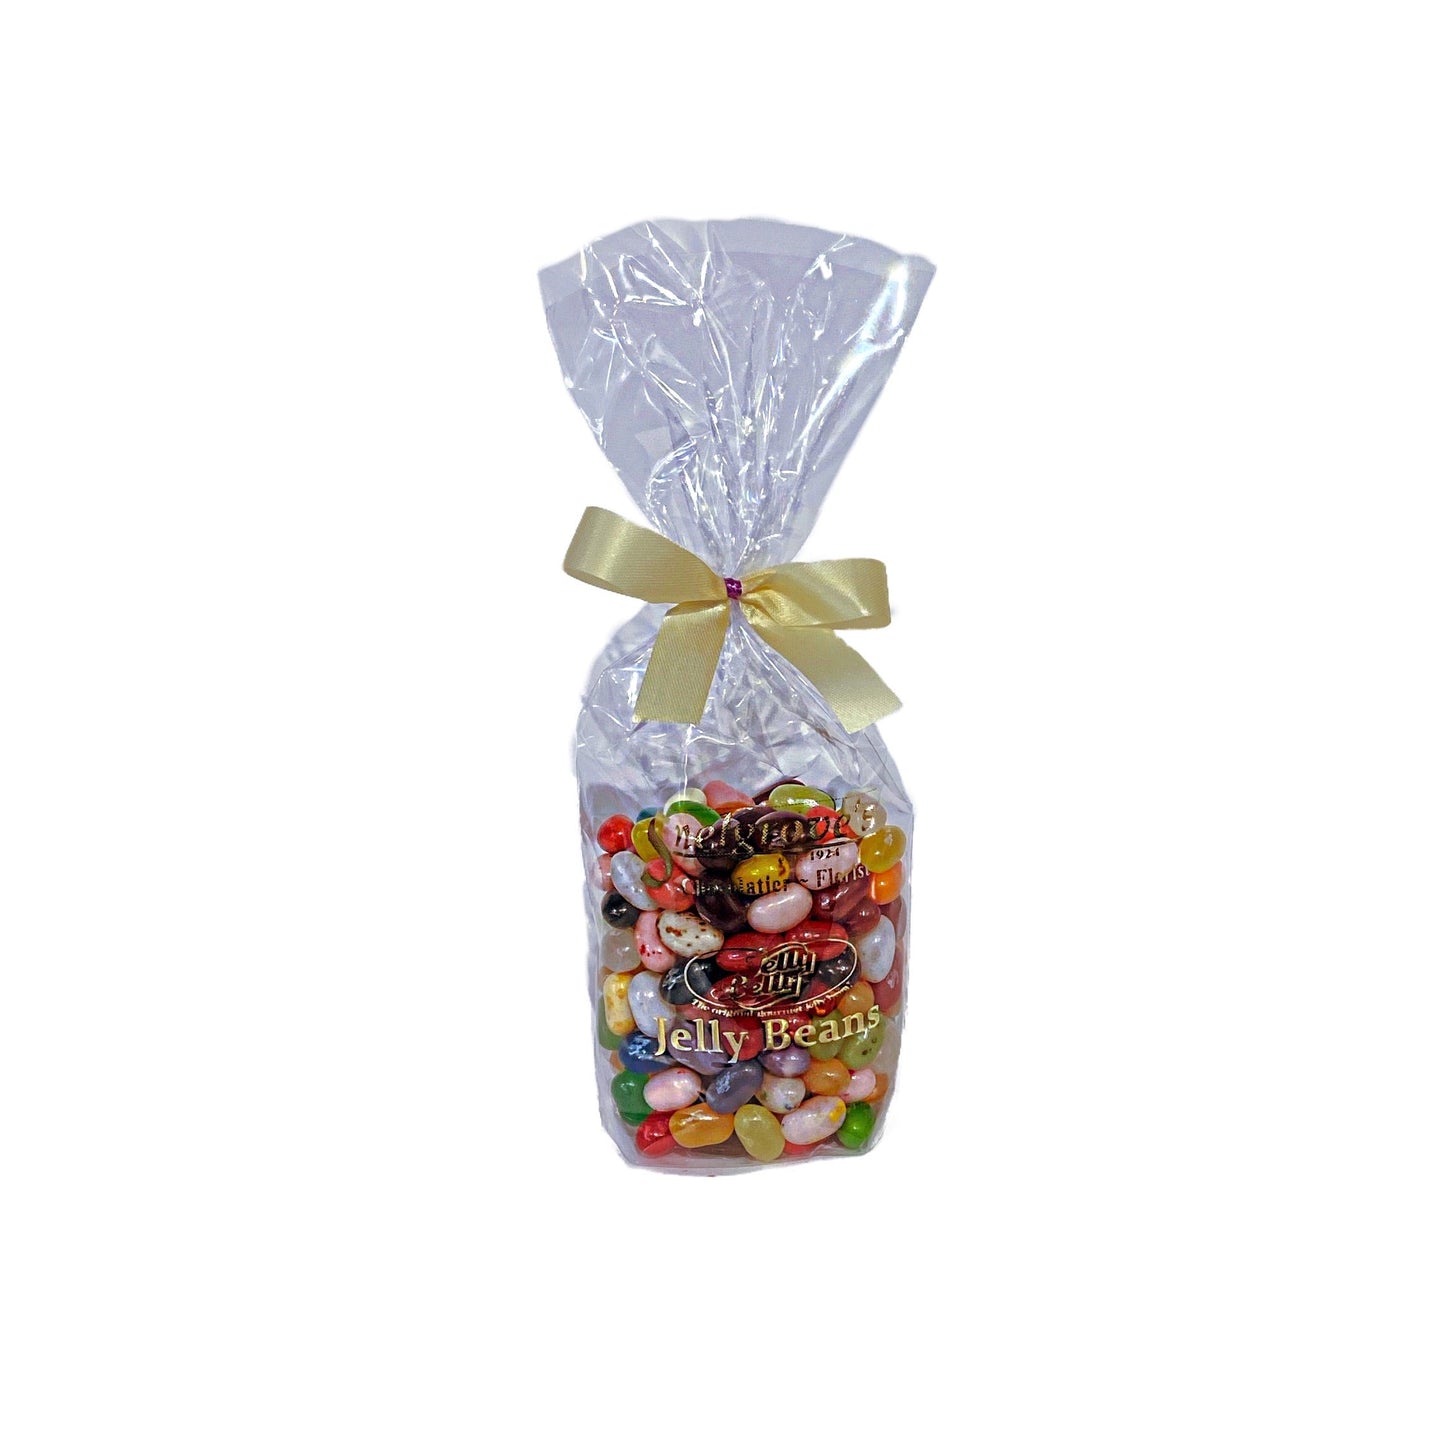 Bagged Jelly Beans (Jelly Belly)